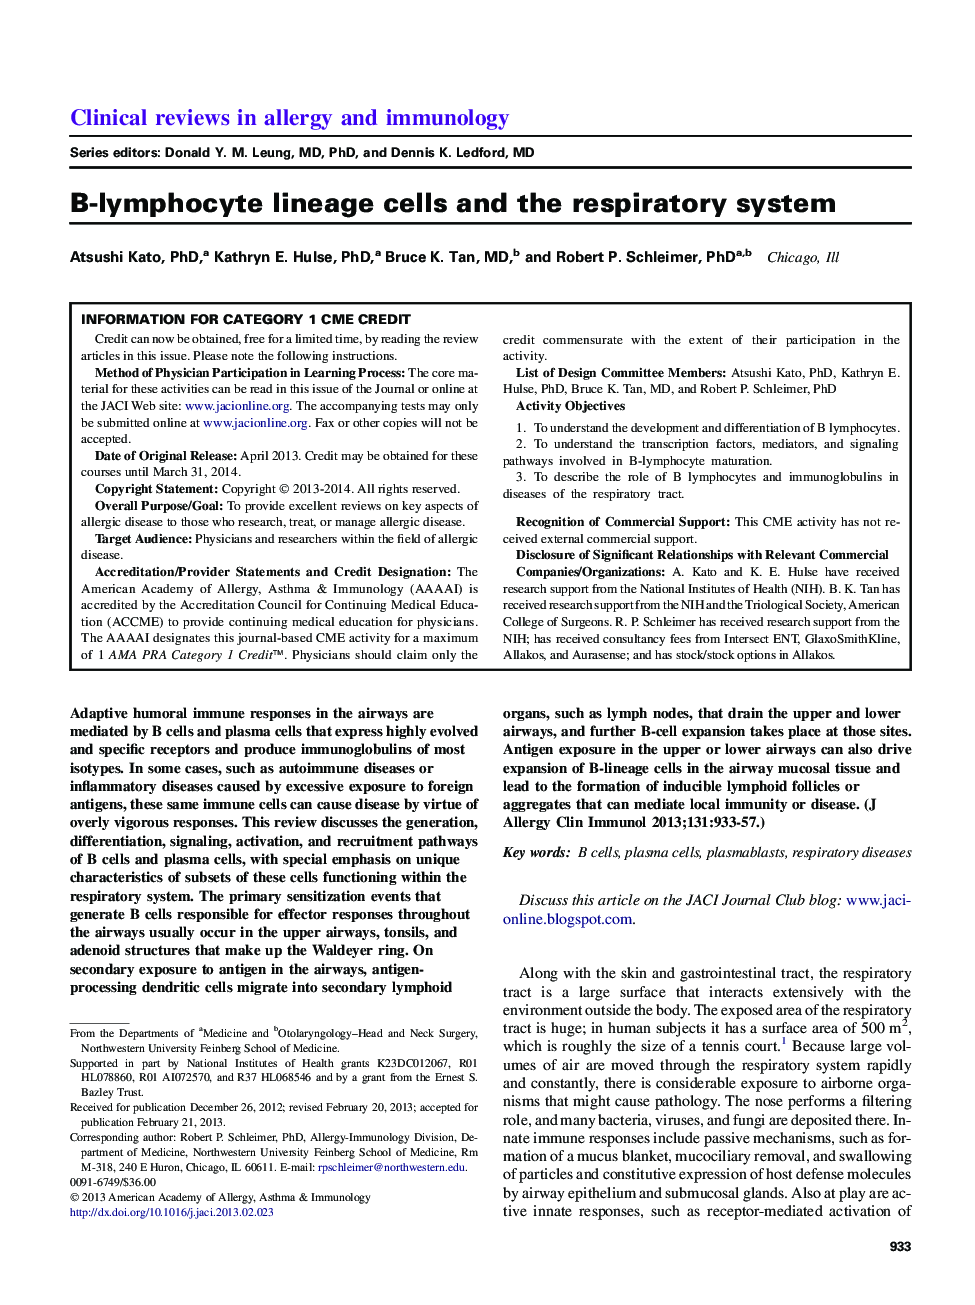 B-lymphocyte lineage cells and the respiratory system